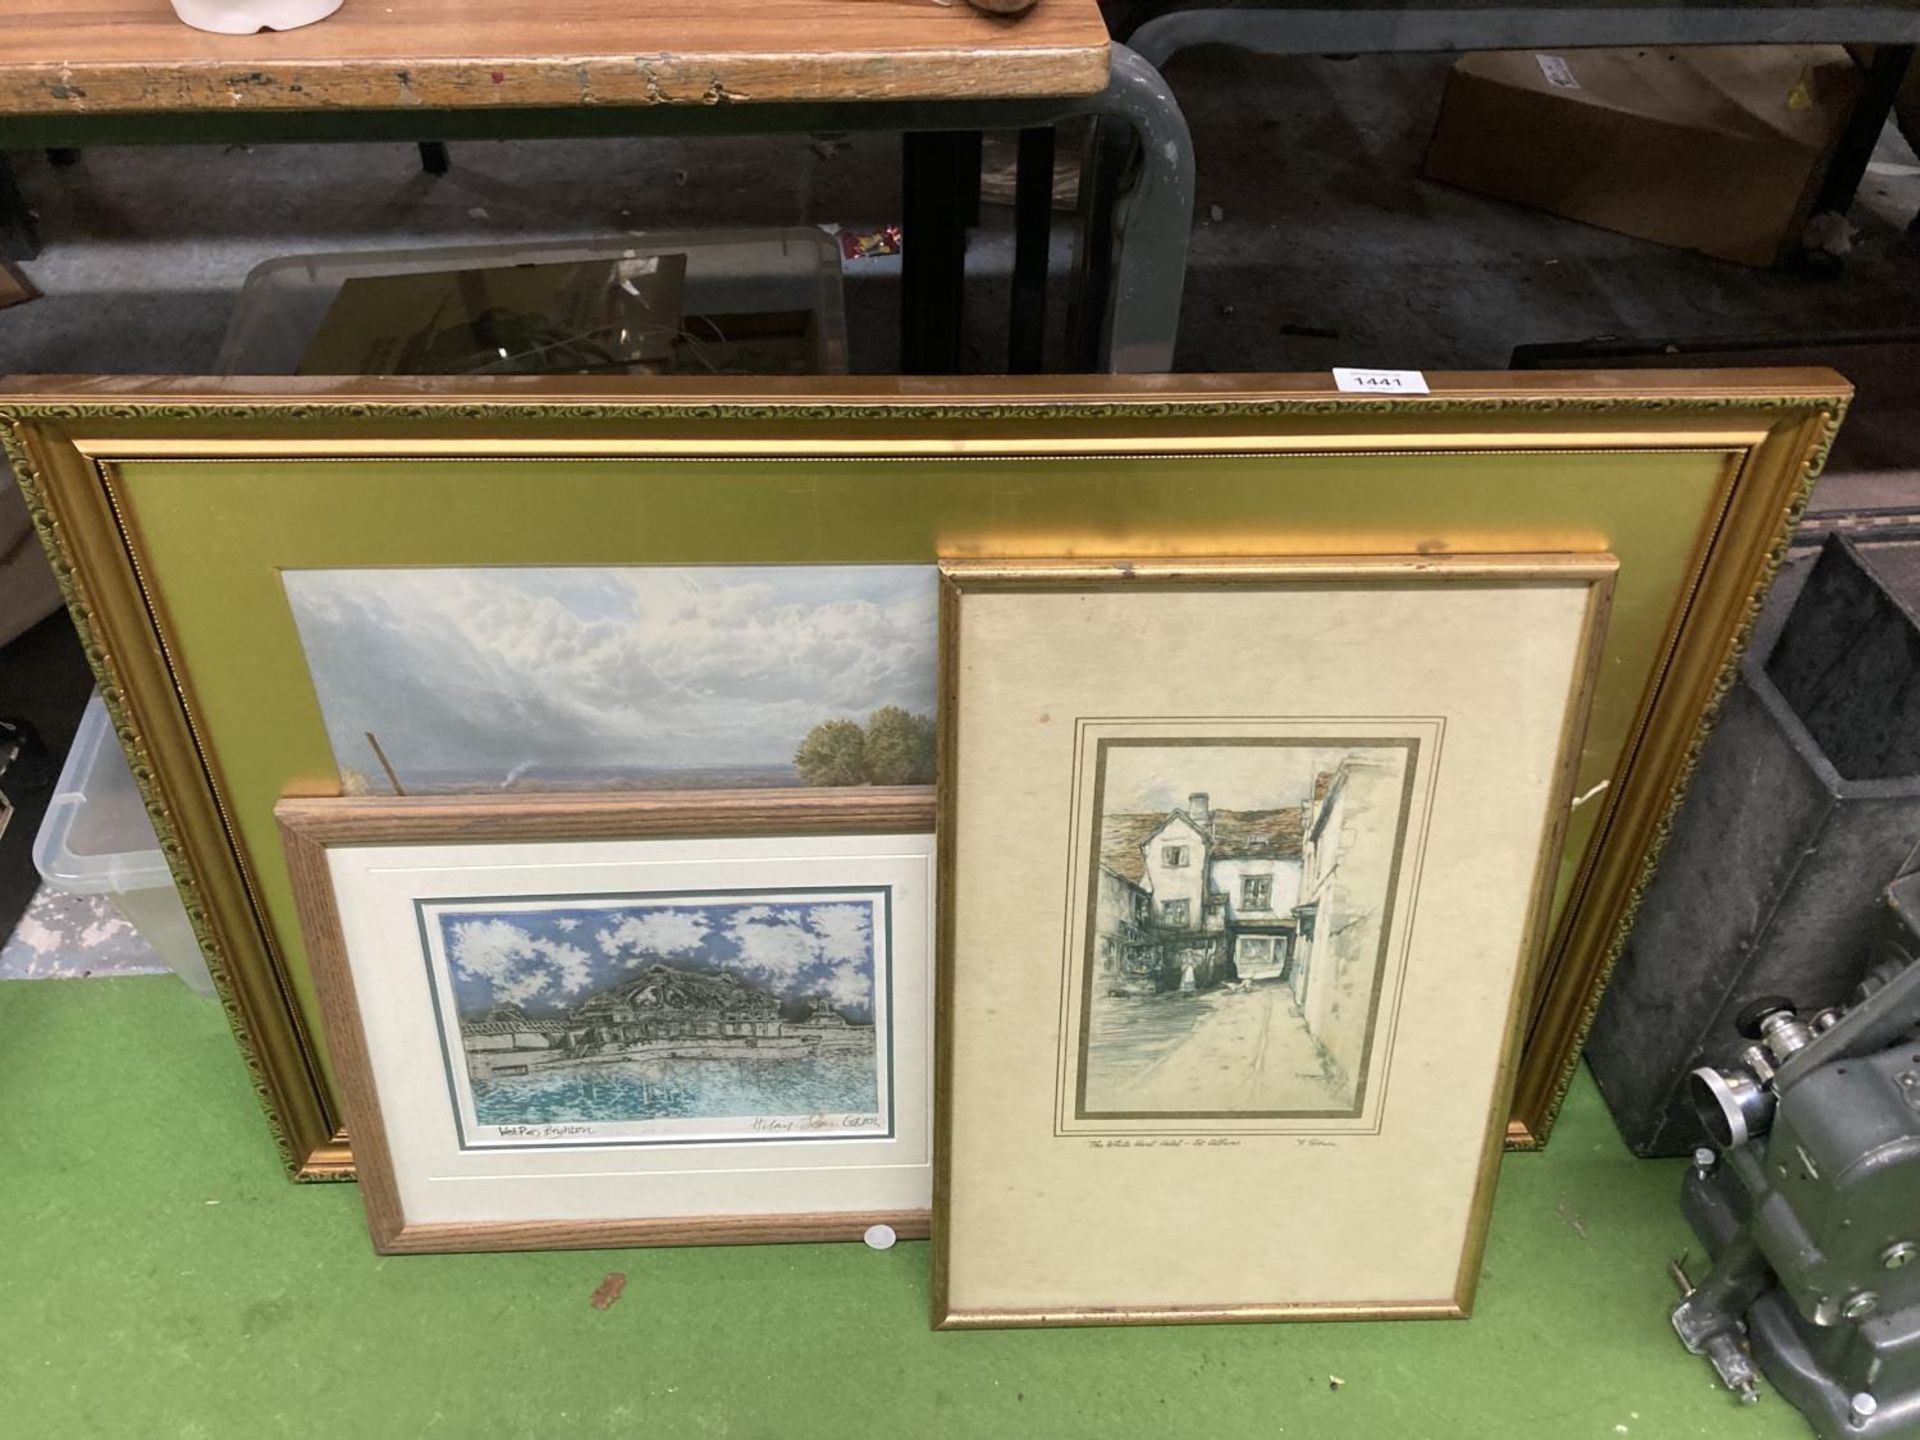 FOUR FRAMED PRINTS , WEST PIER, BRIGHTON, ST ALBANS AND COUNTRYSIDE LARGE GILT FRAMED EXAMPLE